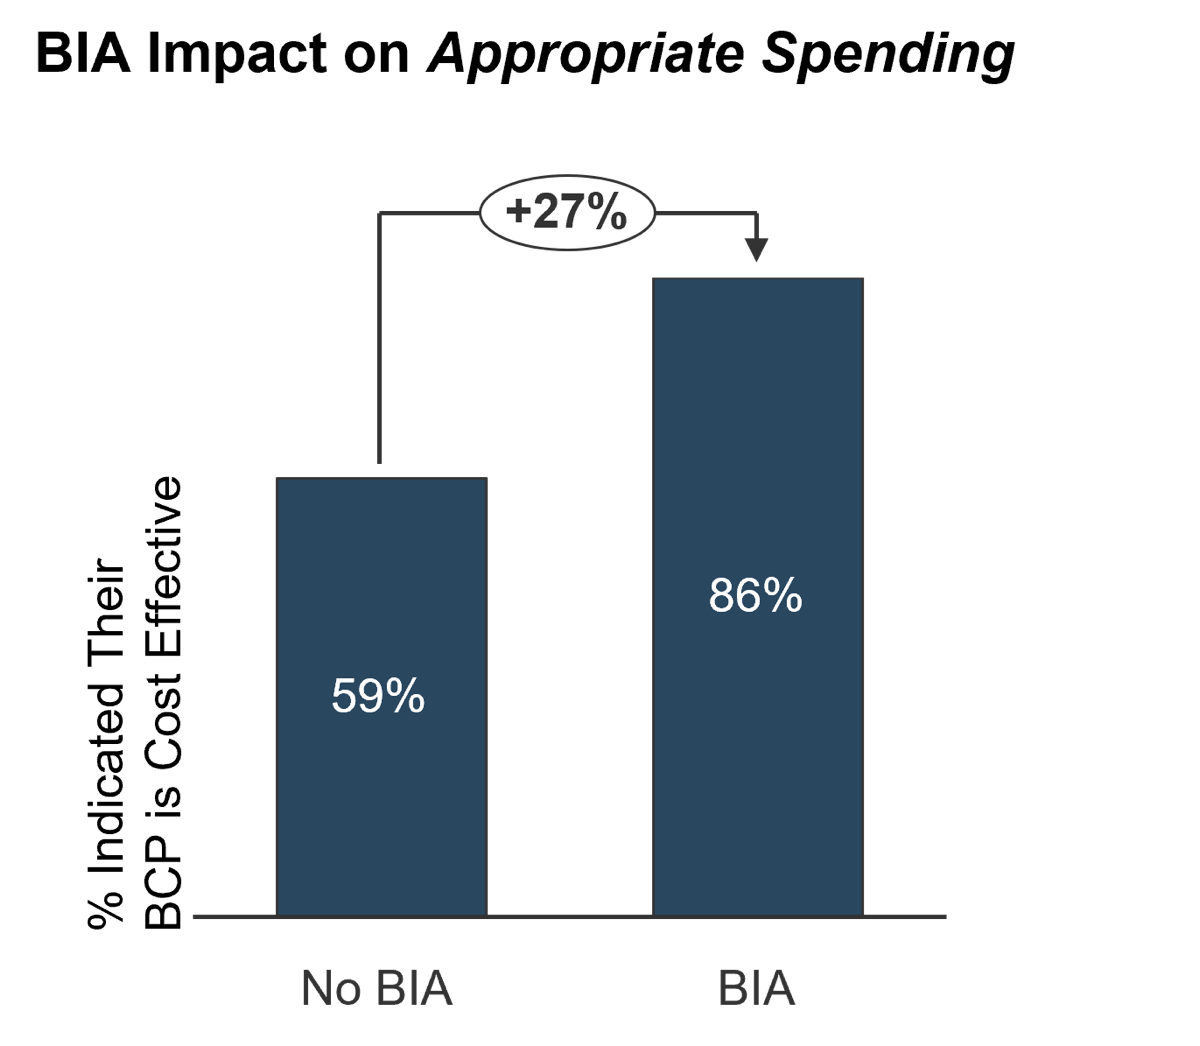 The image contains a graph that is labelled: BIA Impact on Appropriate Spending. No BIA has 59% indication that BCP is cost effective. With a BIA there is 86% indication that BCP is cost effective.